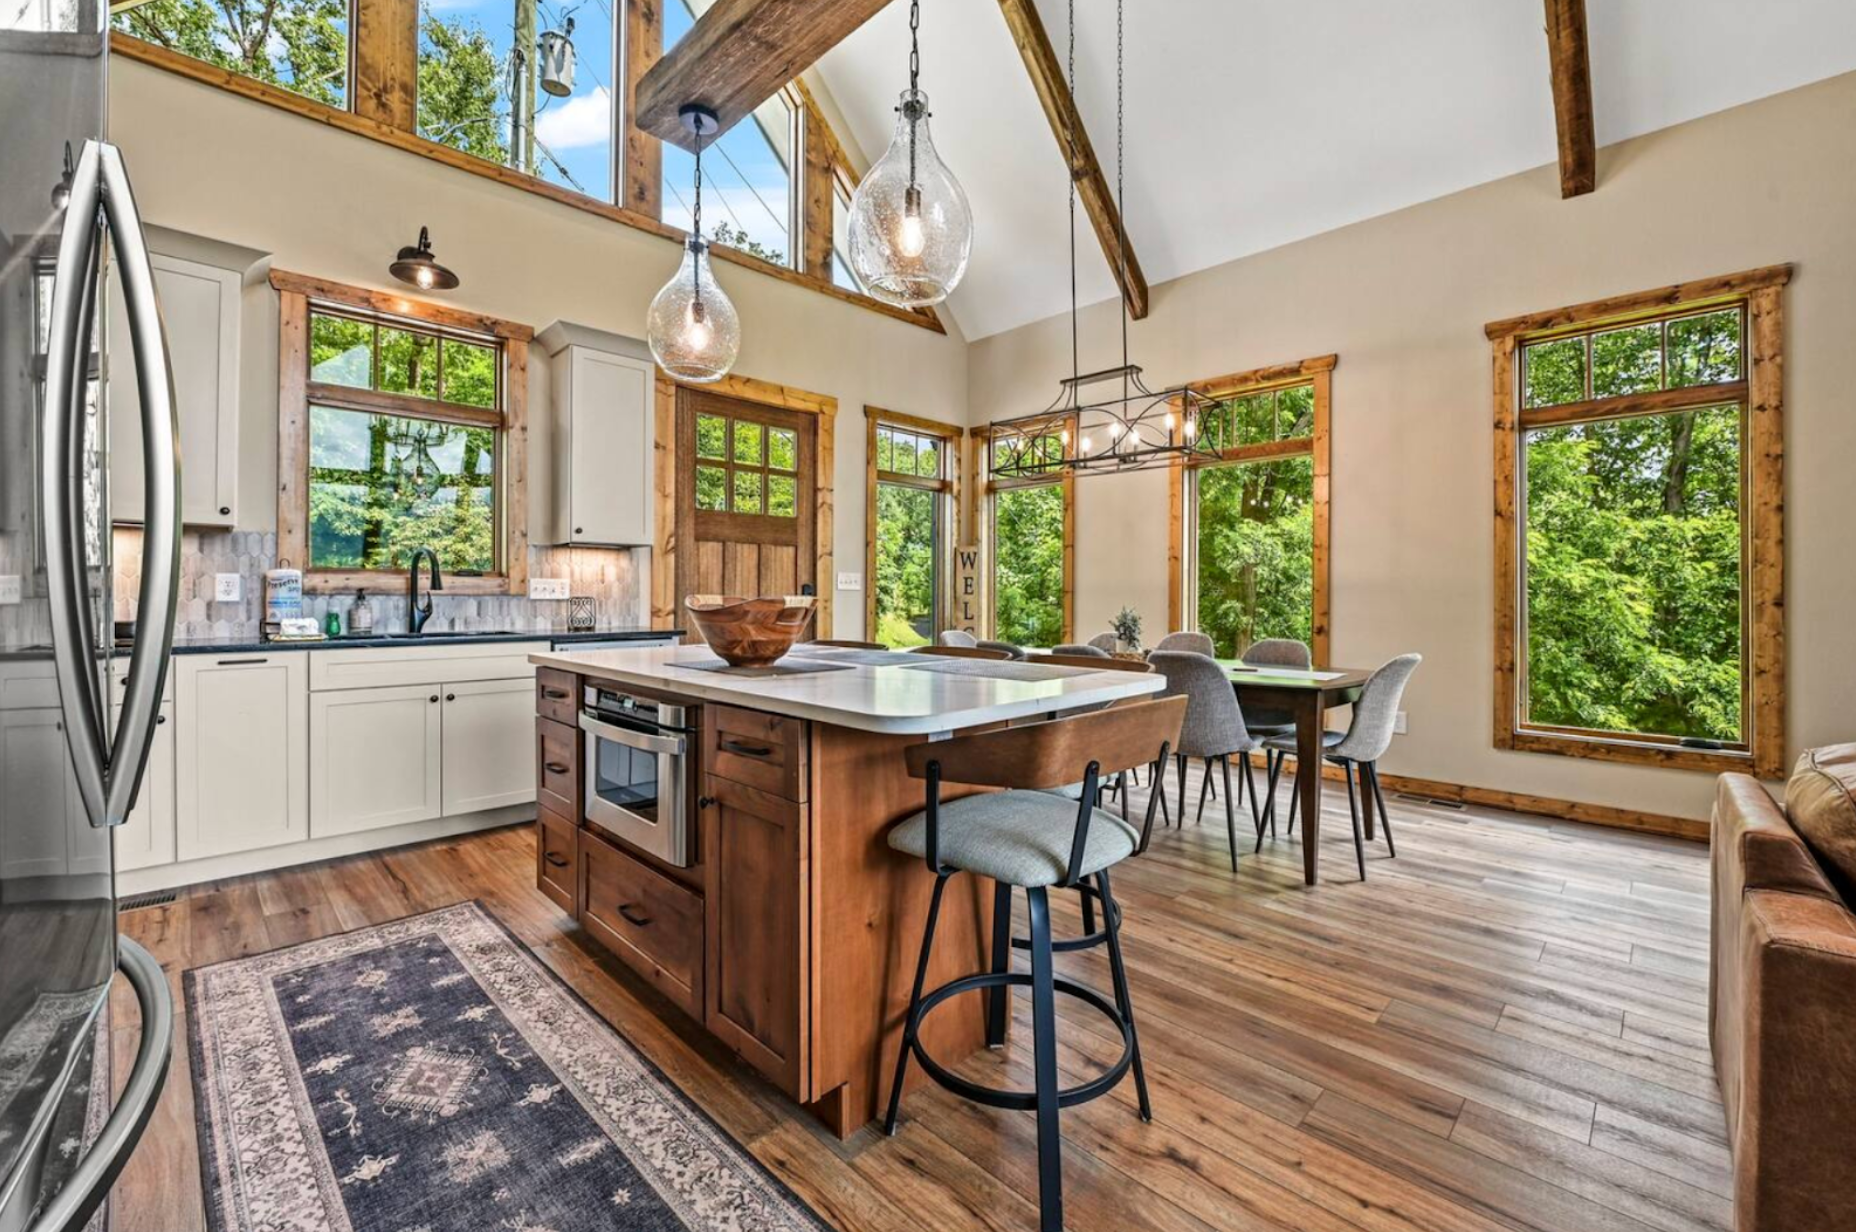 Smoky Mountain guests love the outdoors you can see from this kitchen